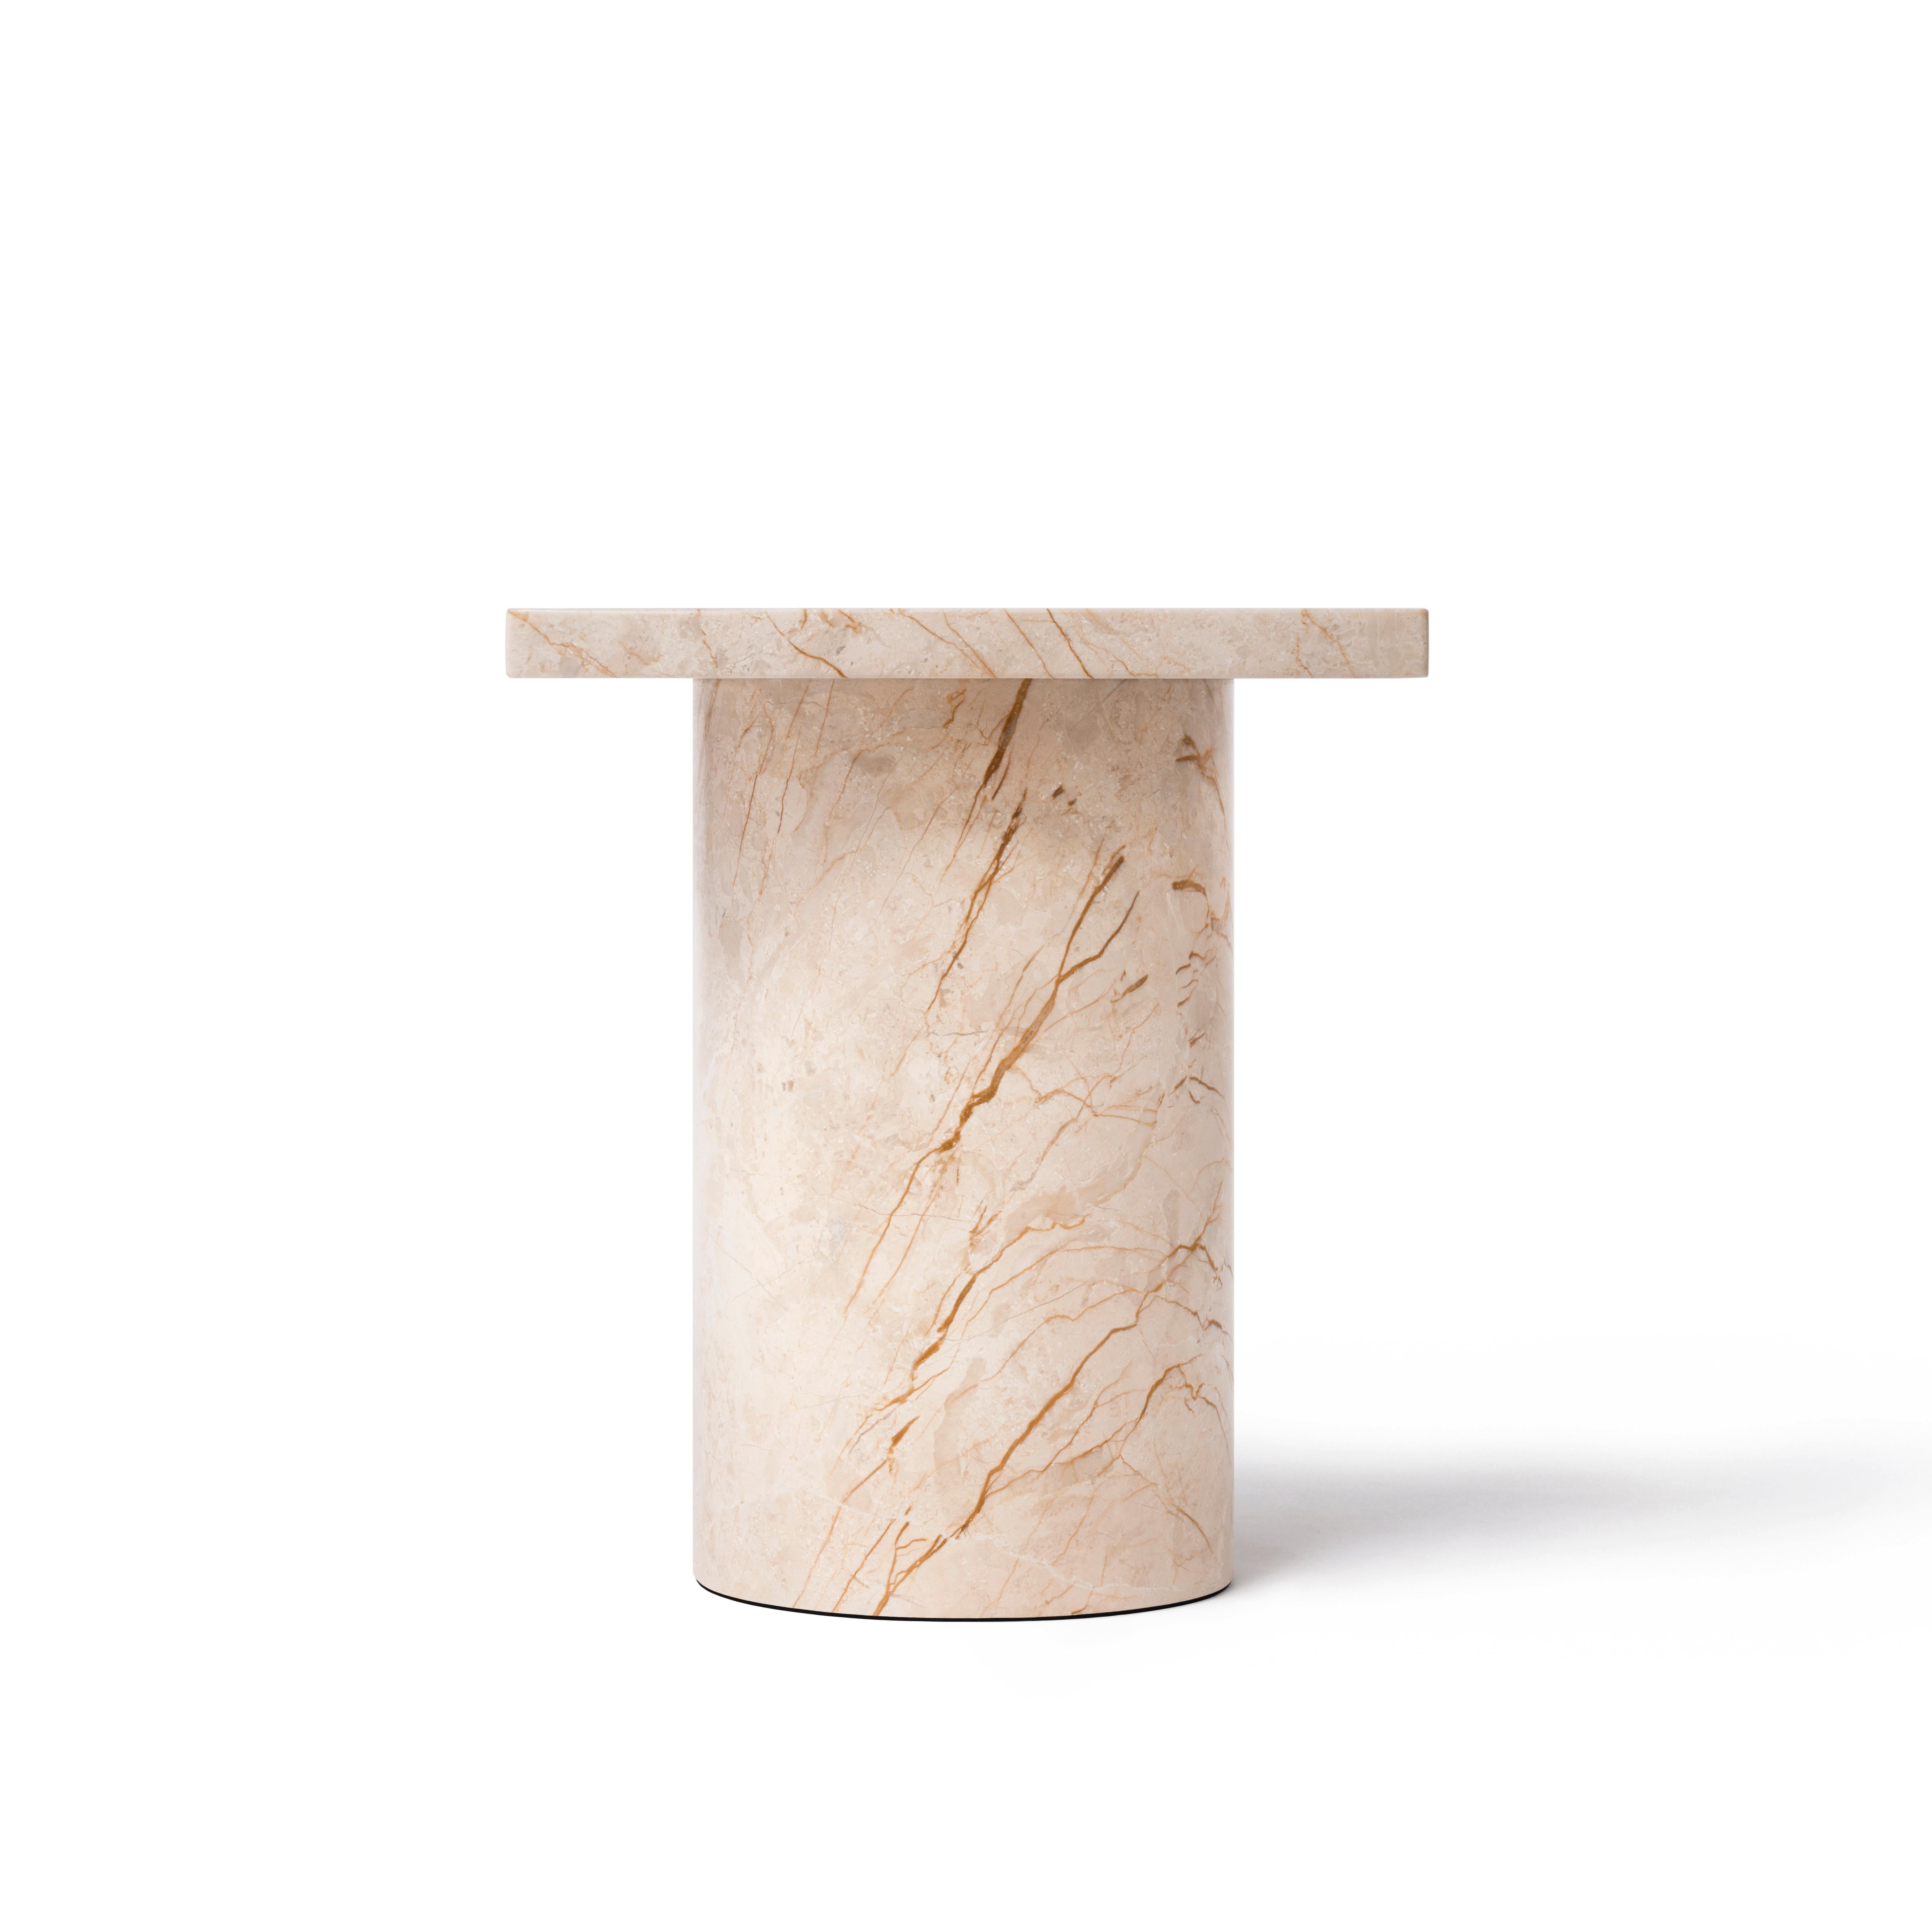 Chinese Contemporary Small Table 'DISLOCATION' in Golden Marble by Buzao 'Square' For Sale